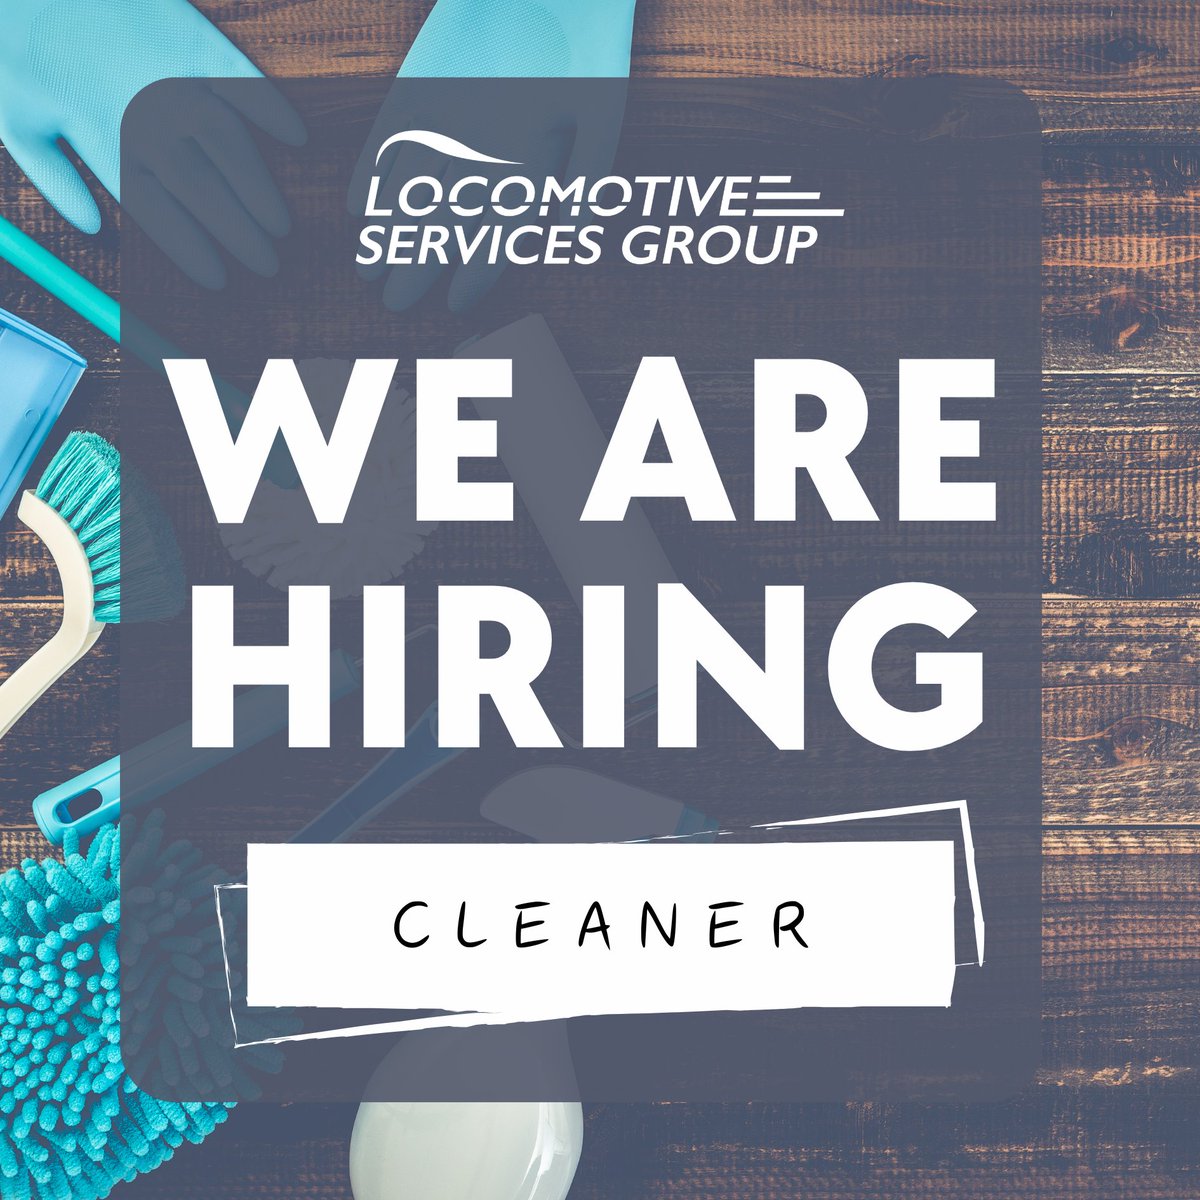 For more information or to apply via Indeed please visit: uk.indeed.com/job/cleaner-c3…. Alternatively please e-mail our Depot Manager with your CV at rob.sanders@locomotivestorage.co.uk